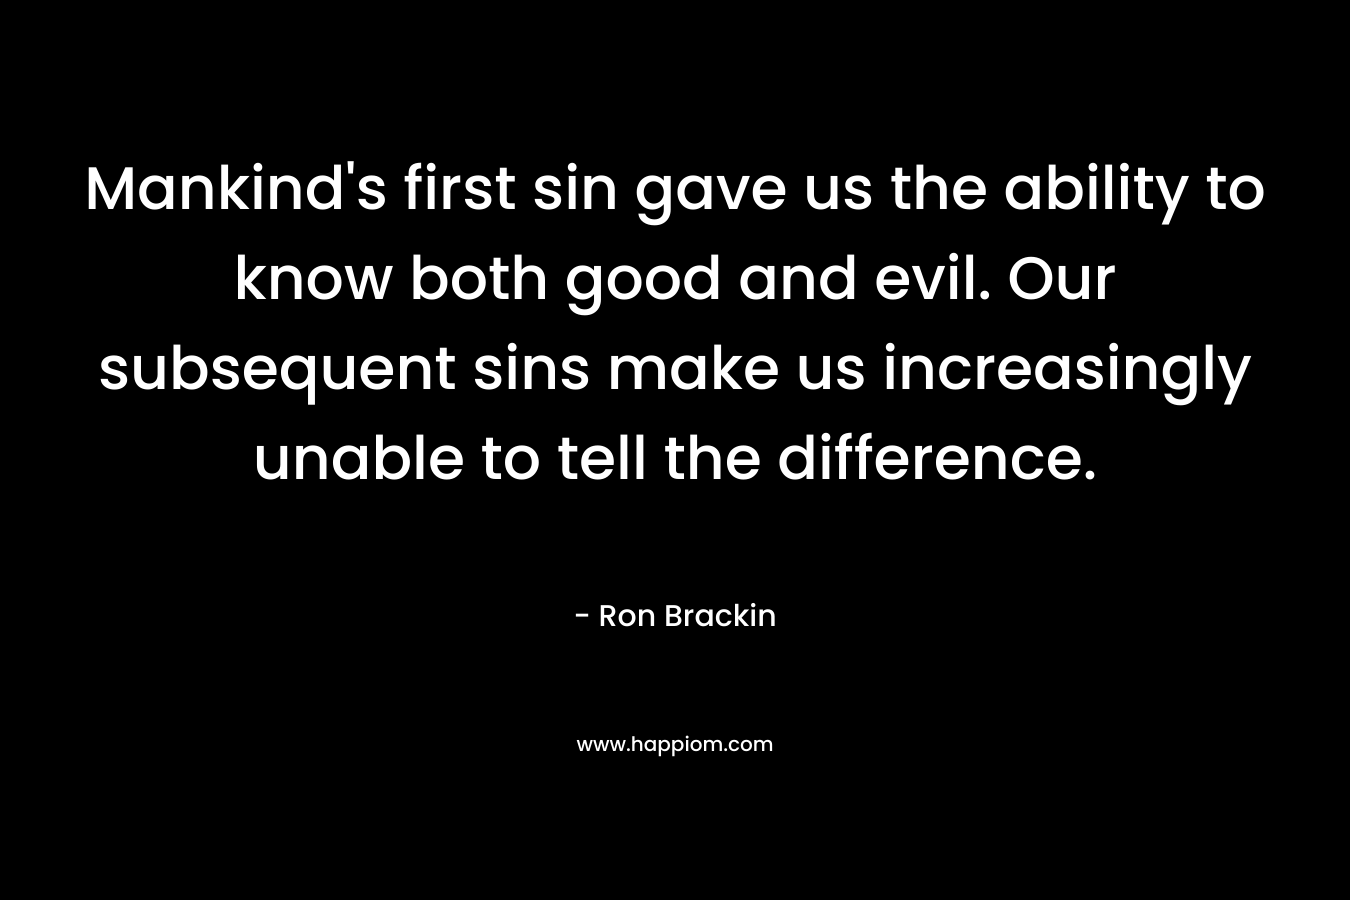 Mankind's first sin gave us the ability to know both good and evil. Our subsequent sins make us increasingly unable to tell the difference.